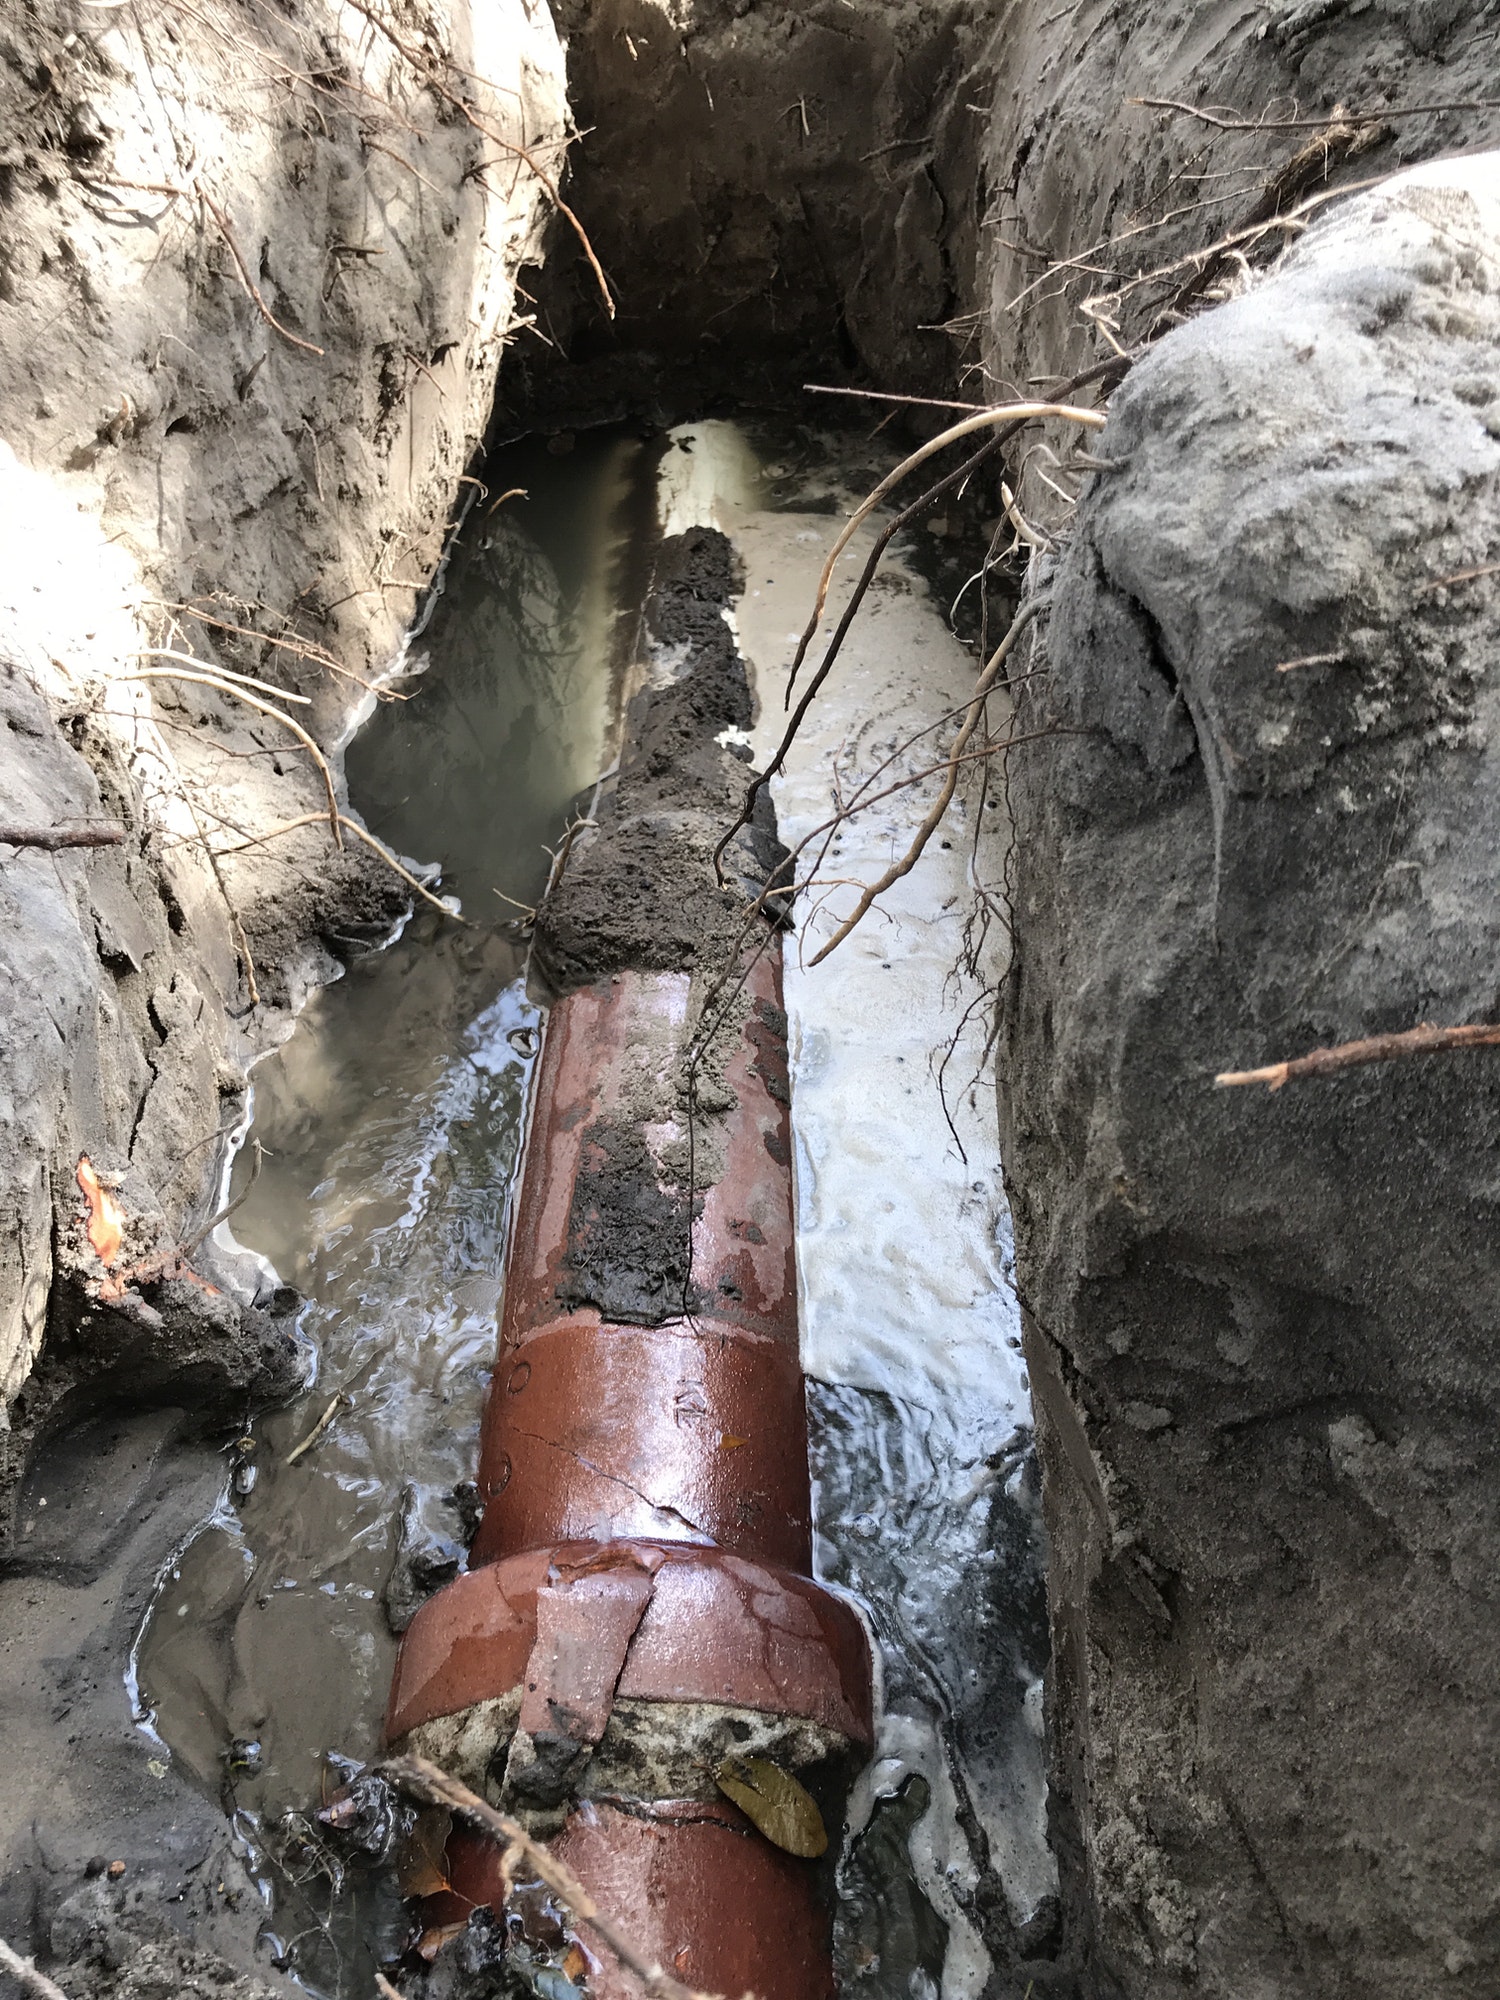 Major sewer leak. Old clay pipes that finally broke.